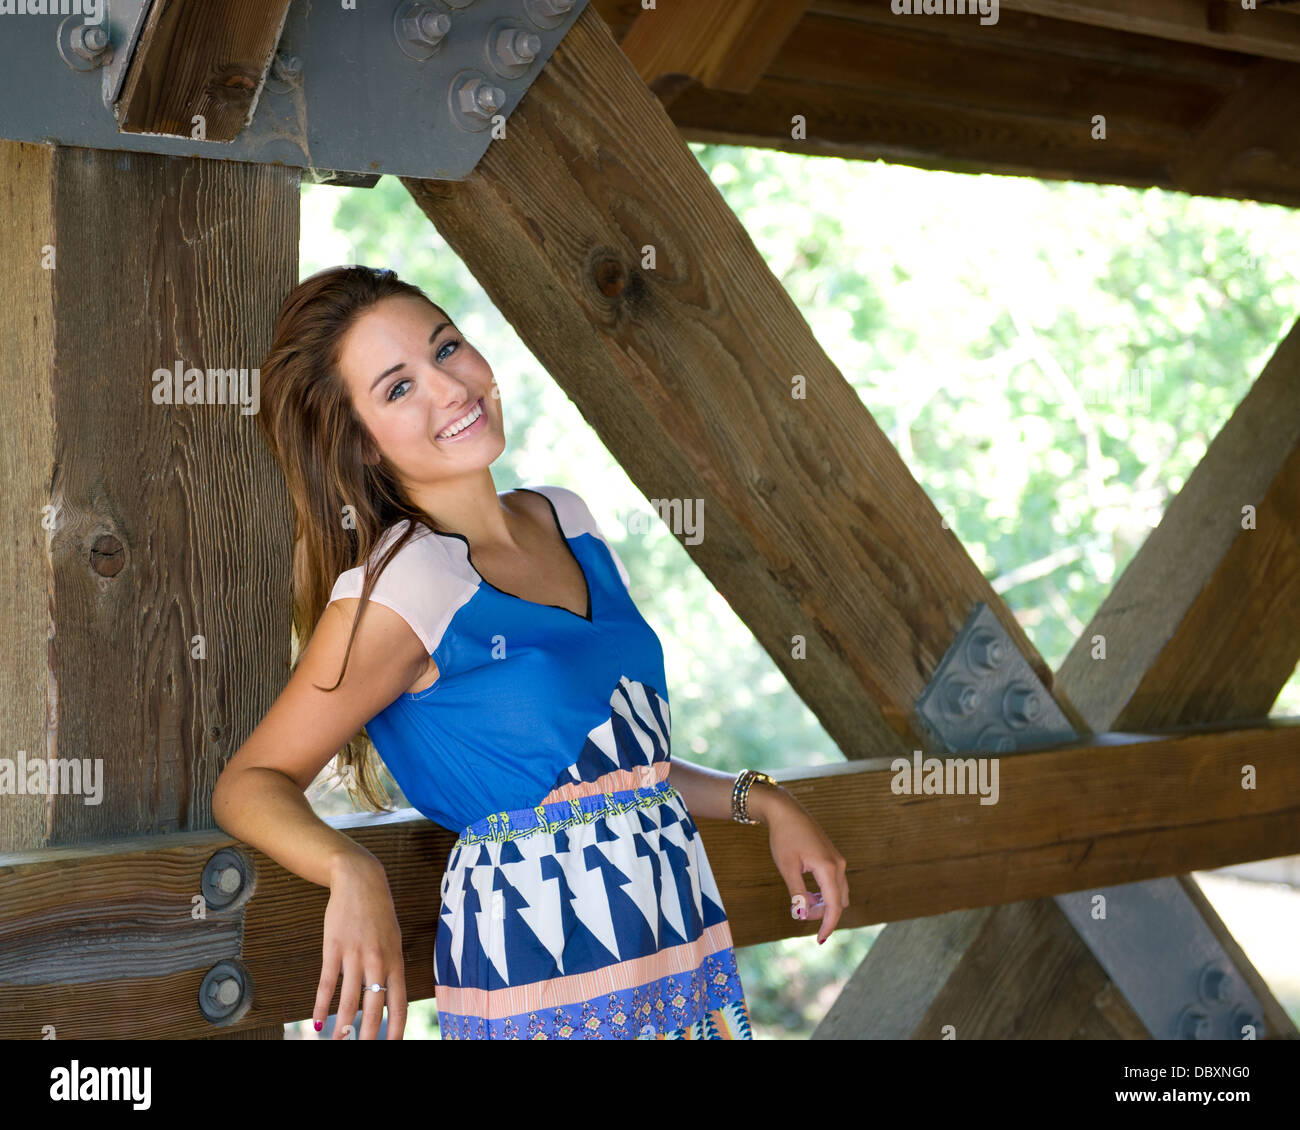 Attractive woman with long brown hair wearing a blue dress leans on the side of a covered wooden bridge. Stock Photo